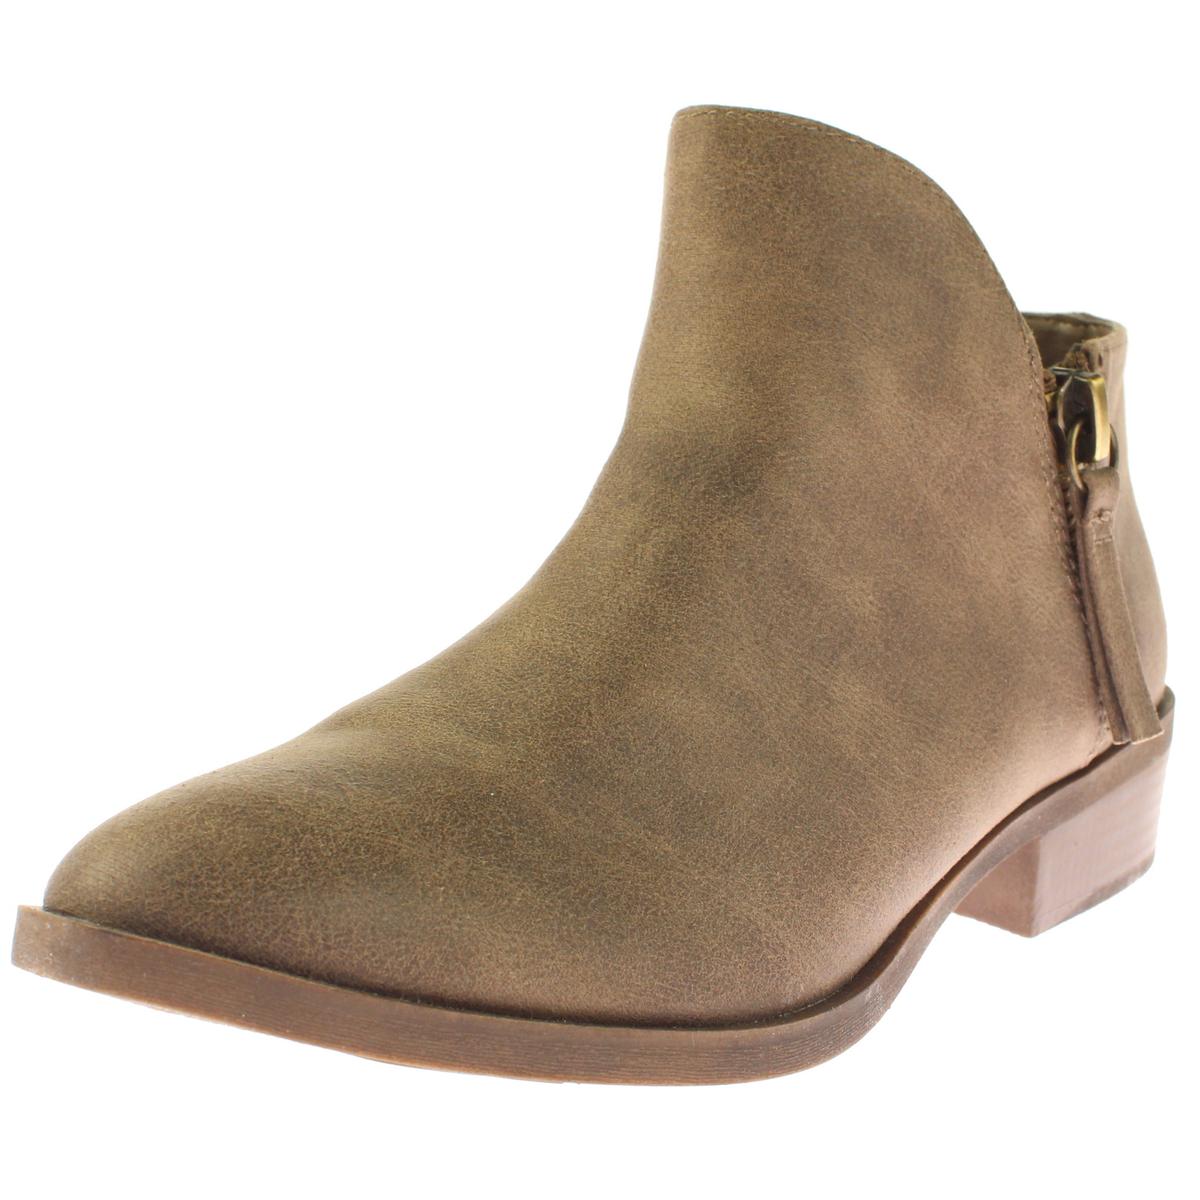 Fergalicious by Fergie Nash Womens Almond Toe Stacked Heel Ankle Boots